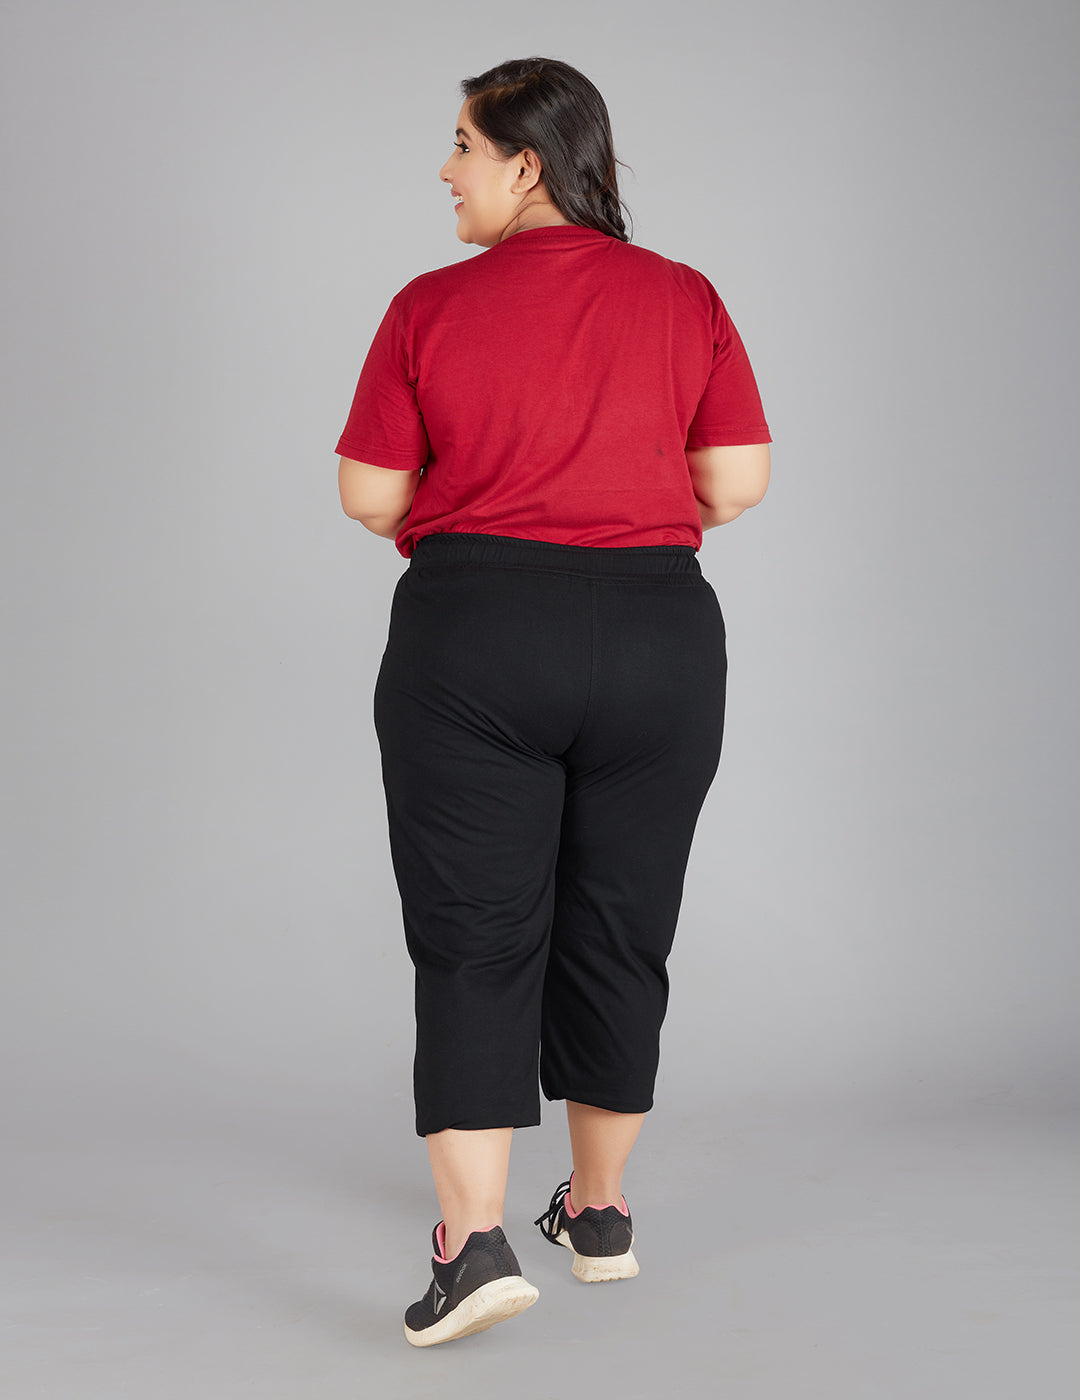 Amazon.com : MOREFEEL Capri Plus Size Leggings for Women with  Pockets-Stretchy XL-4XL Tummy Control High Waist Workout Black Yoga Pants :  Clothing, Shoes & Jewelry